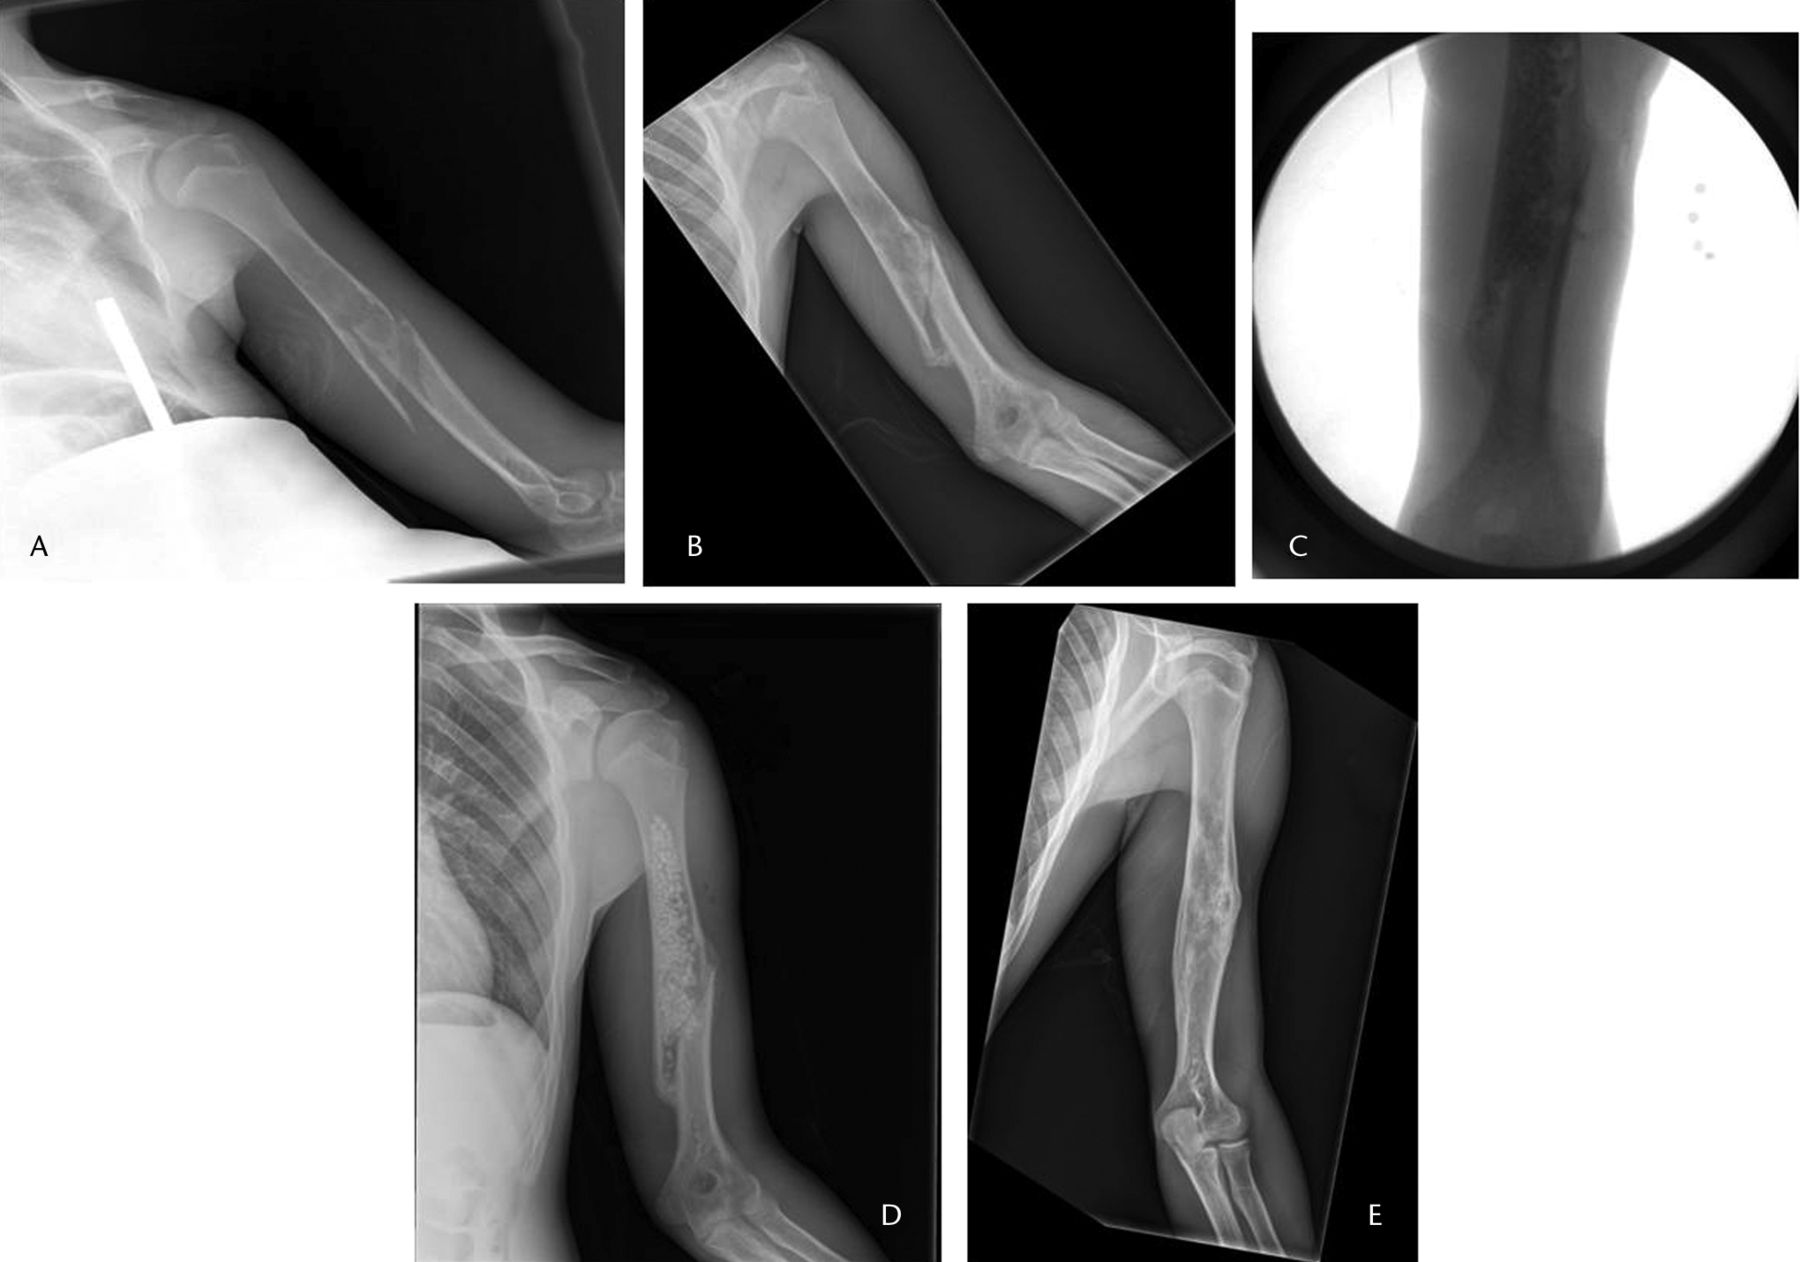 Fig. 1 
          Radiographs of a 16-year-old male patient,
a) at presentation, showing a pathological fracture of the left
humerus through a unicameral bone cyst, b) at two months after treatment
in a sling with interval healing, c) and d) after percutaneous curettage
and bone grafting, respectively, and e) at two years post-operatively,
showing a healed cyst.
        